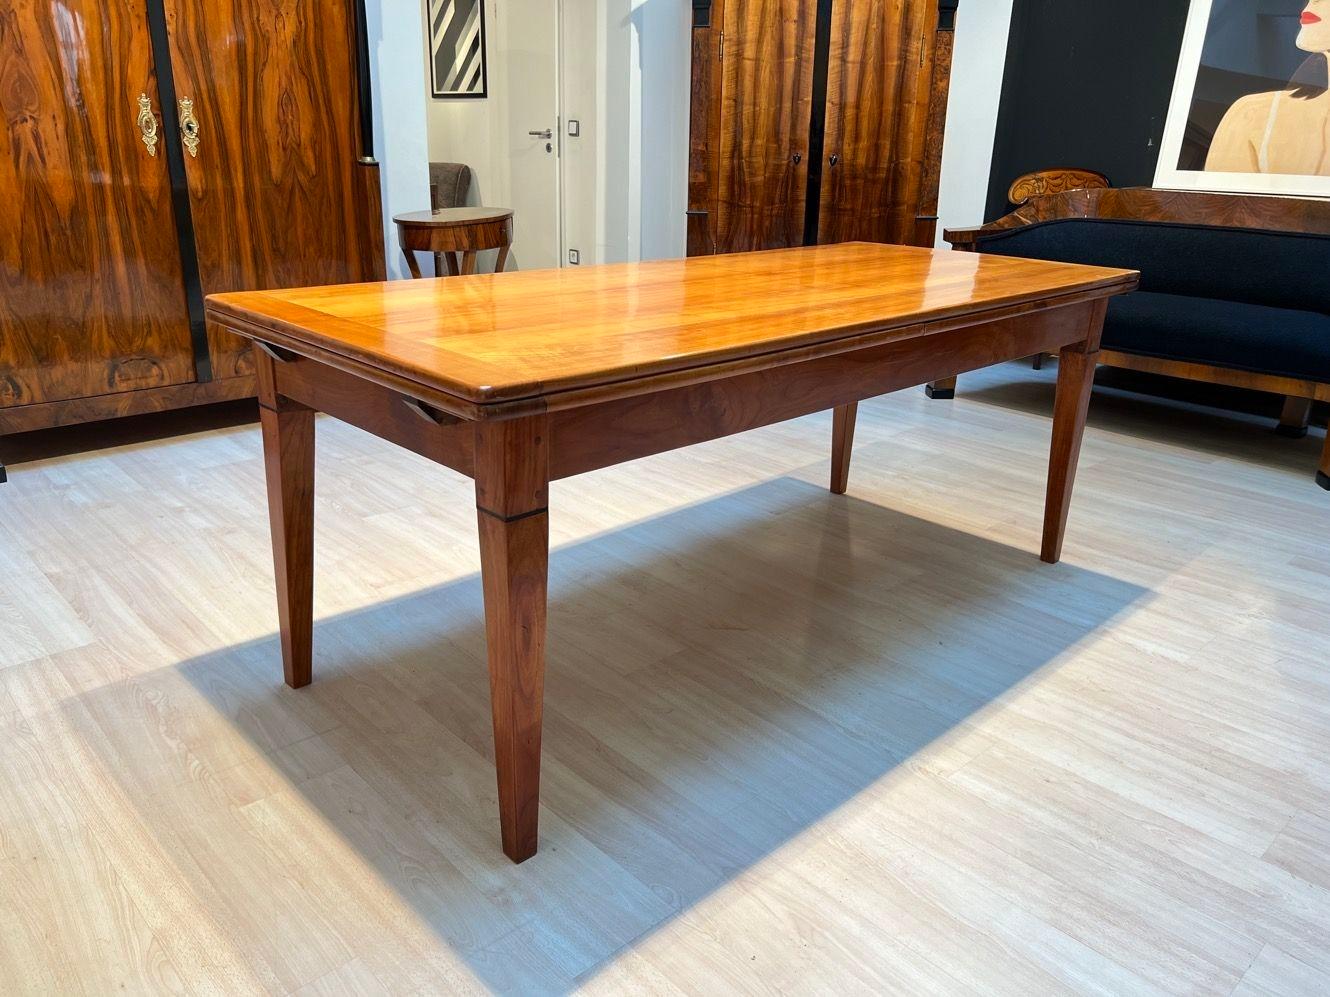 Polished Early 19th Century French Expandable Dining Table, Cherry Wood and Chestnut For Sale